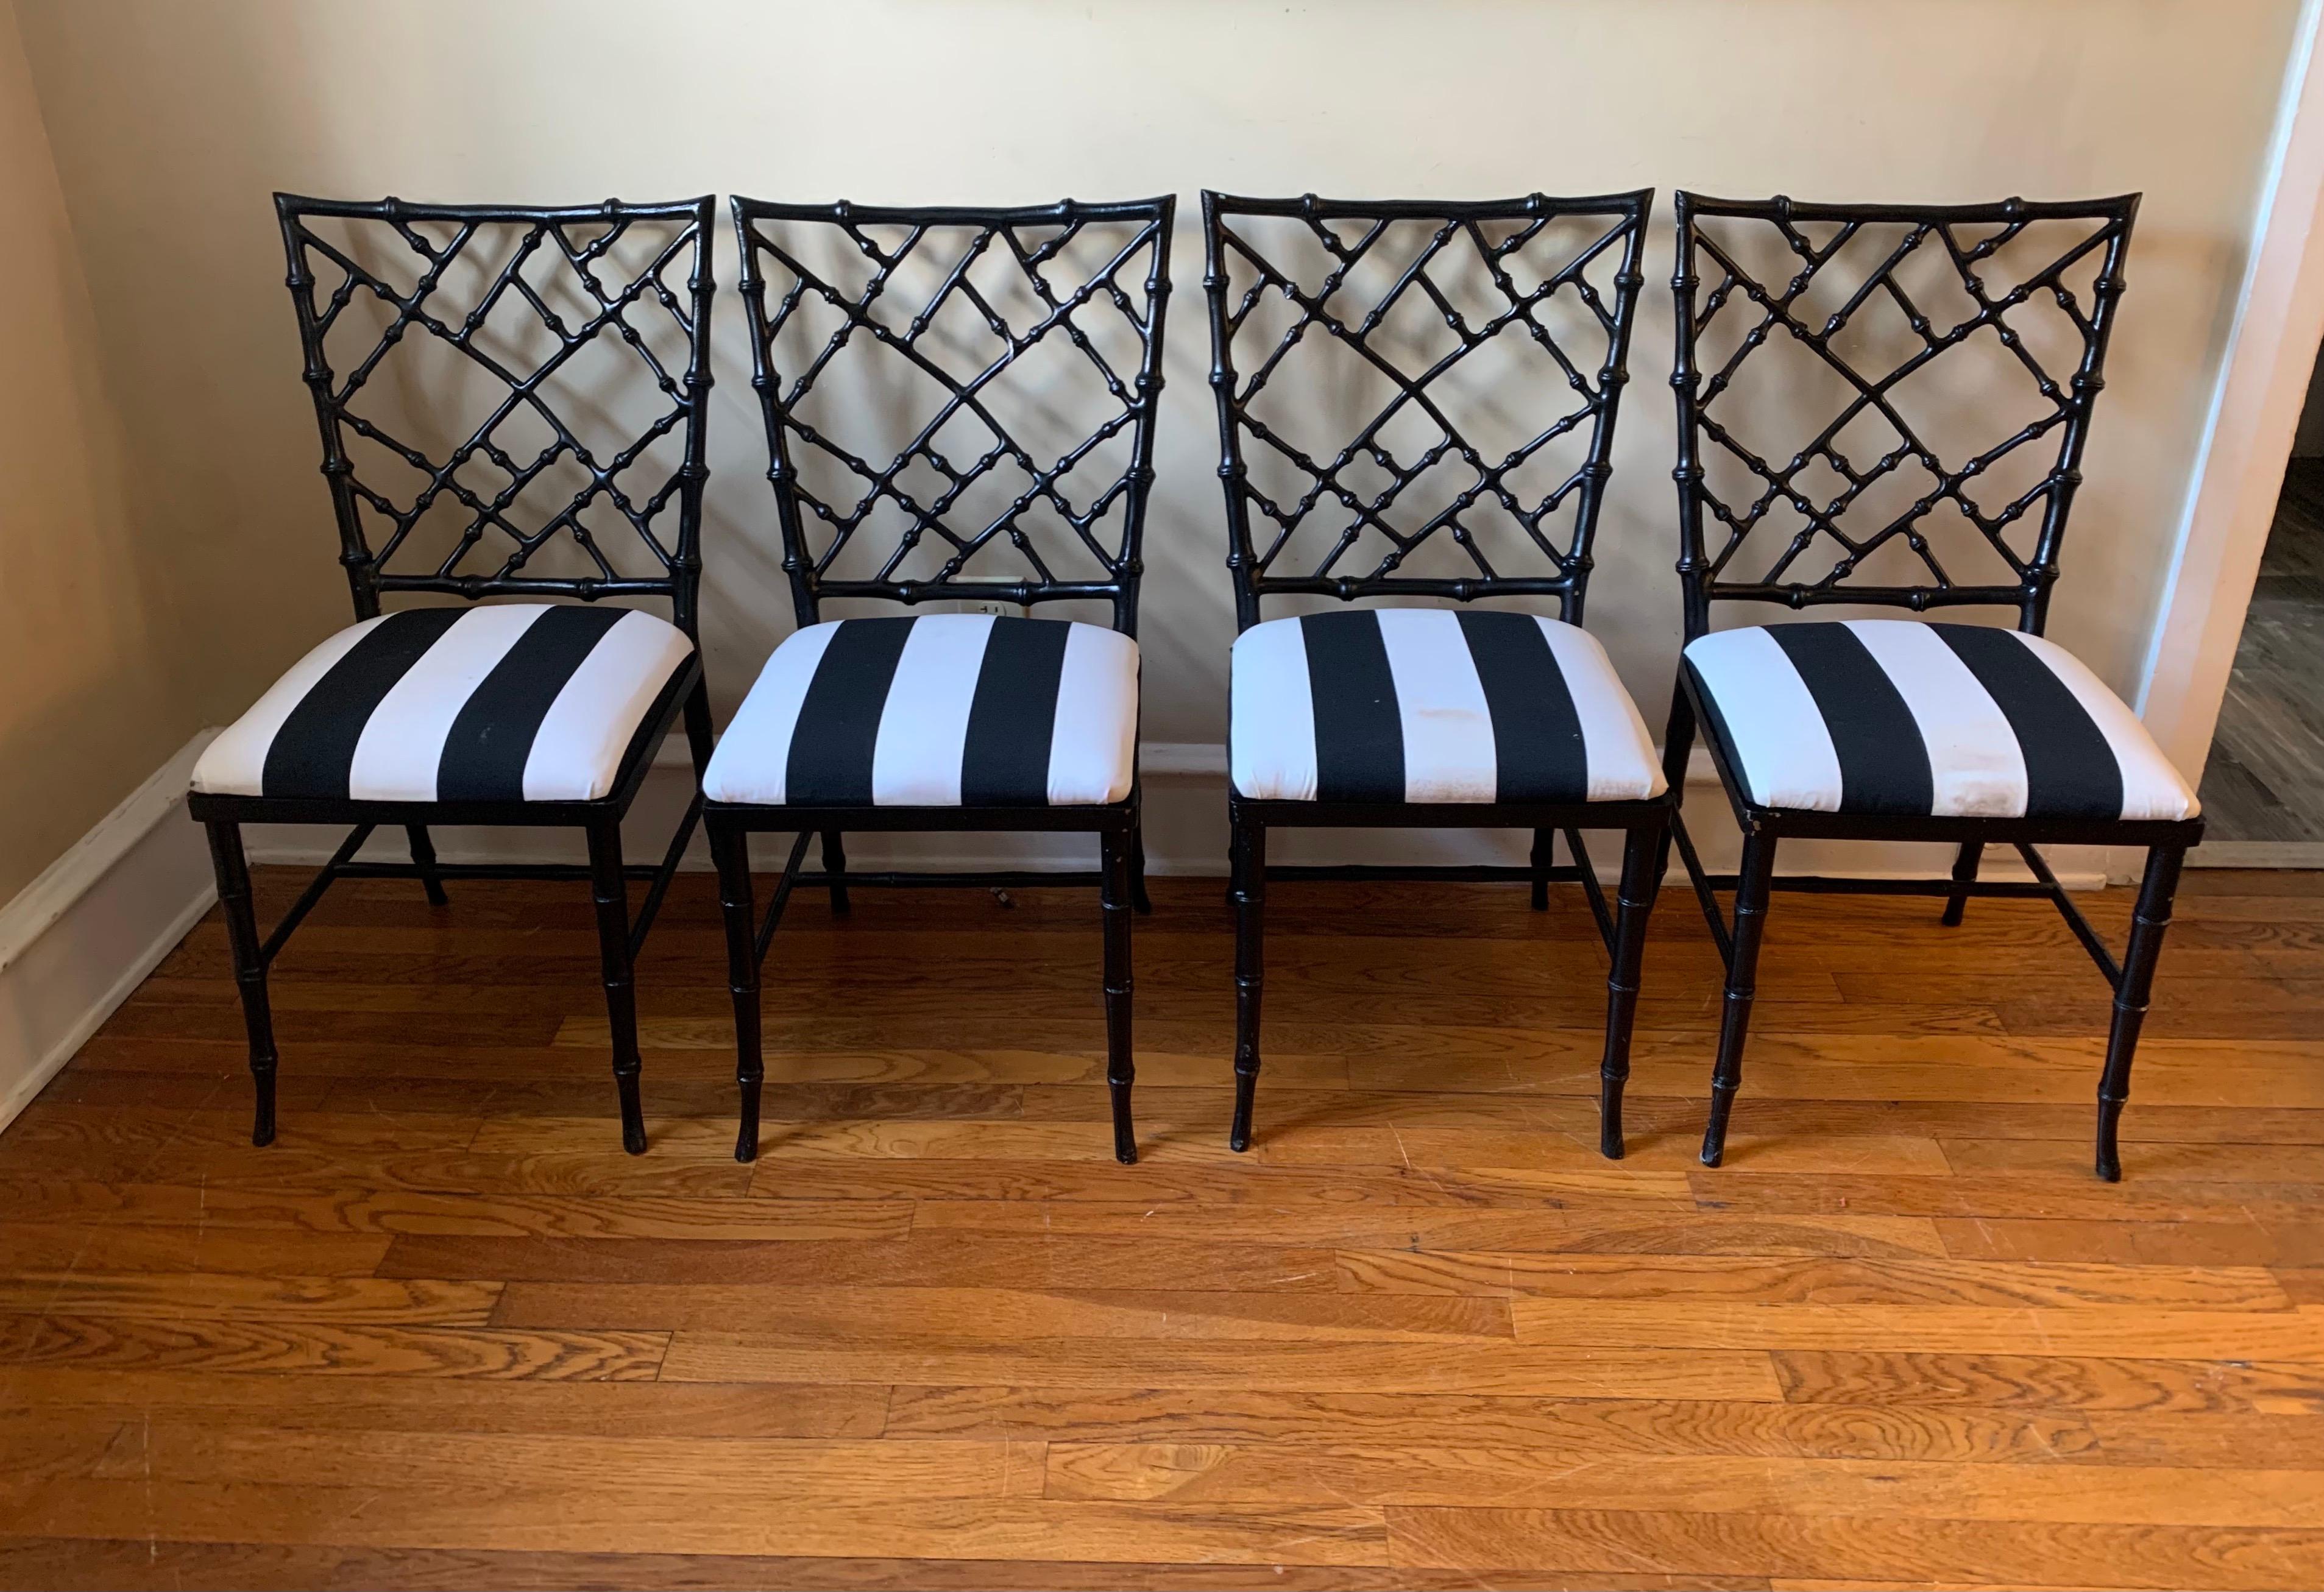 Aluminum Hollywood Regency Faux-Bamboo Cast Metal Chairs by Phyllis Morris, Set of 4